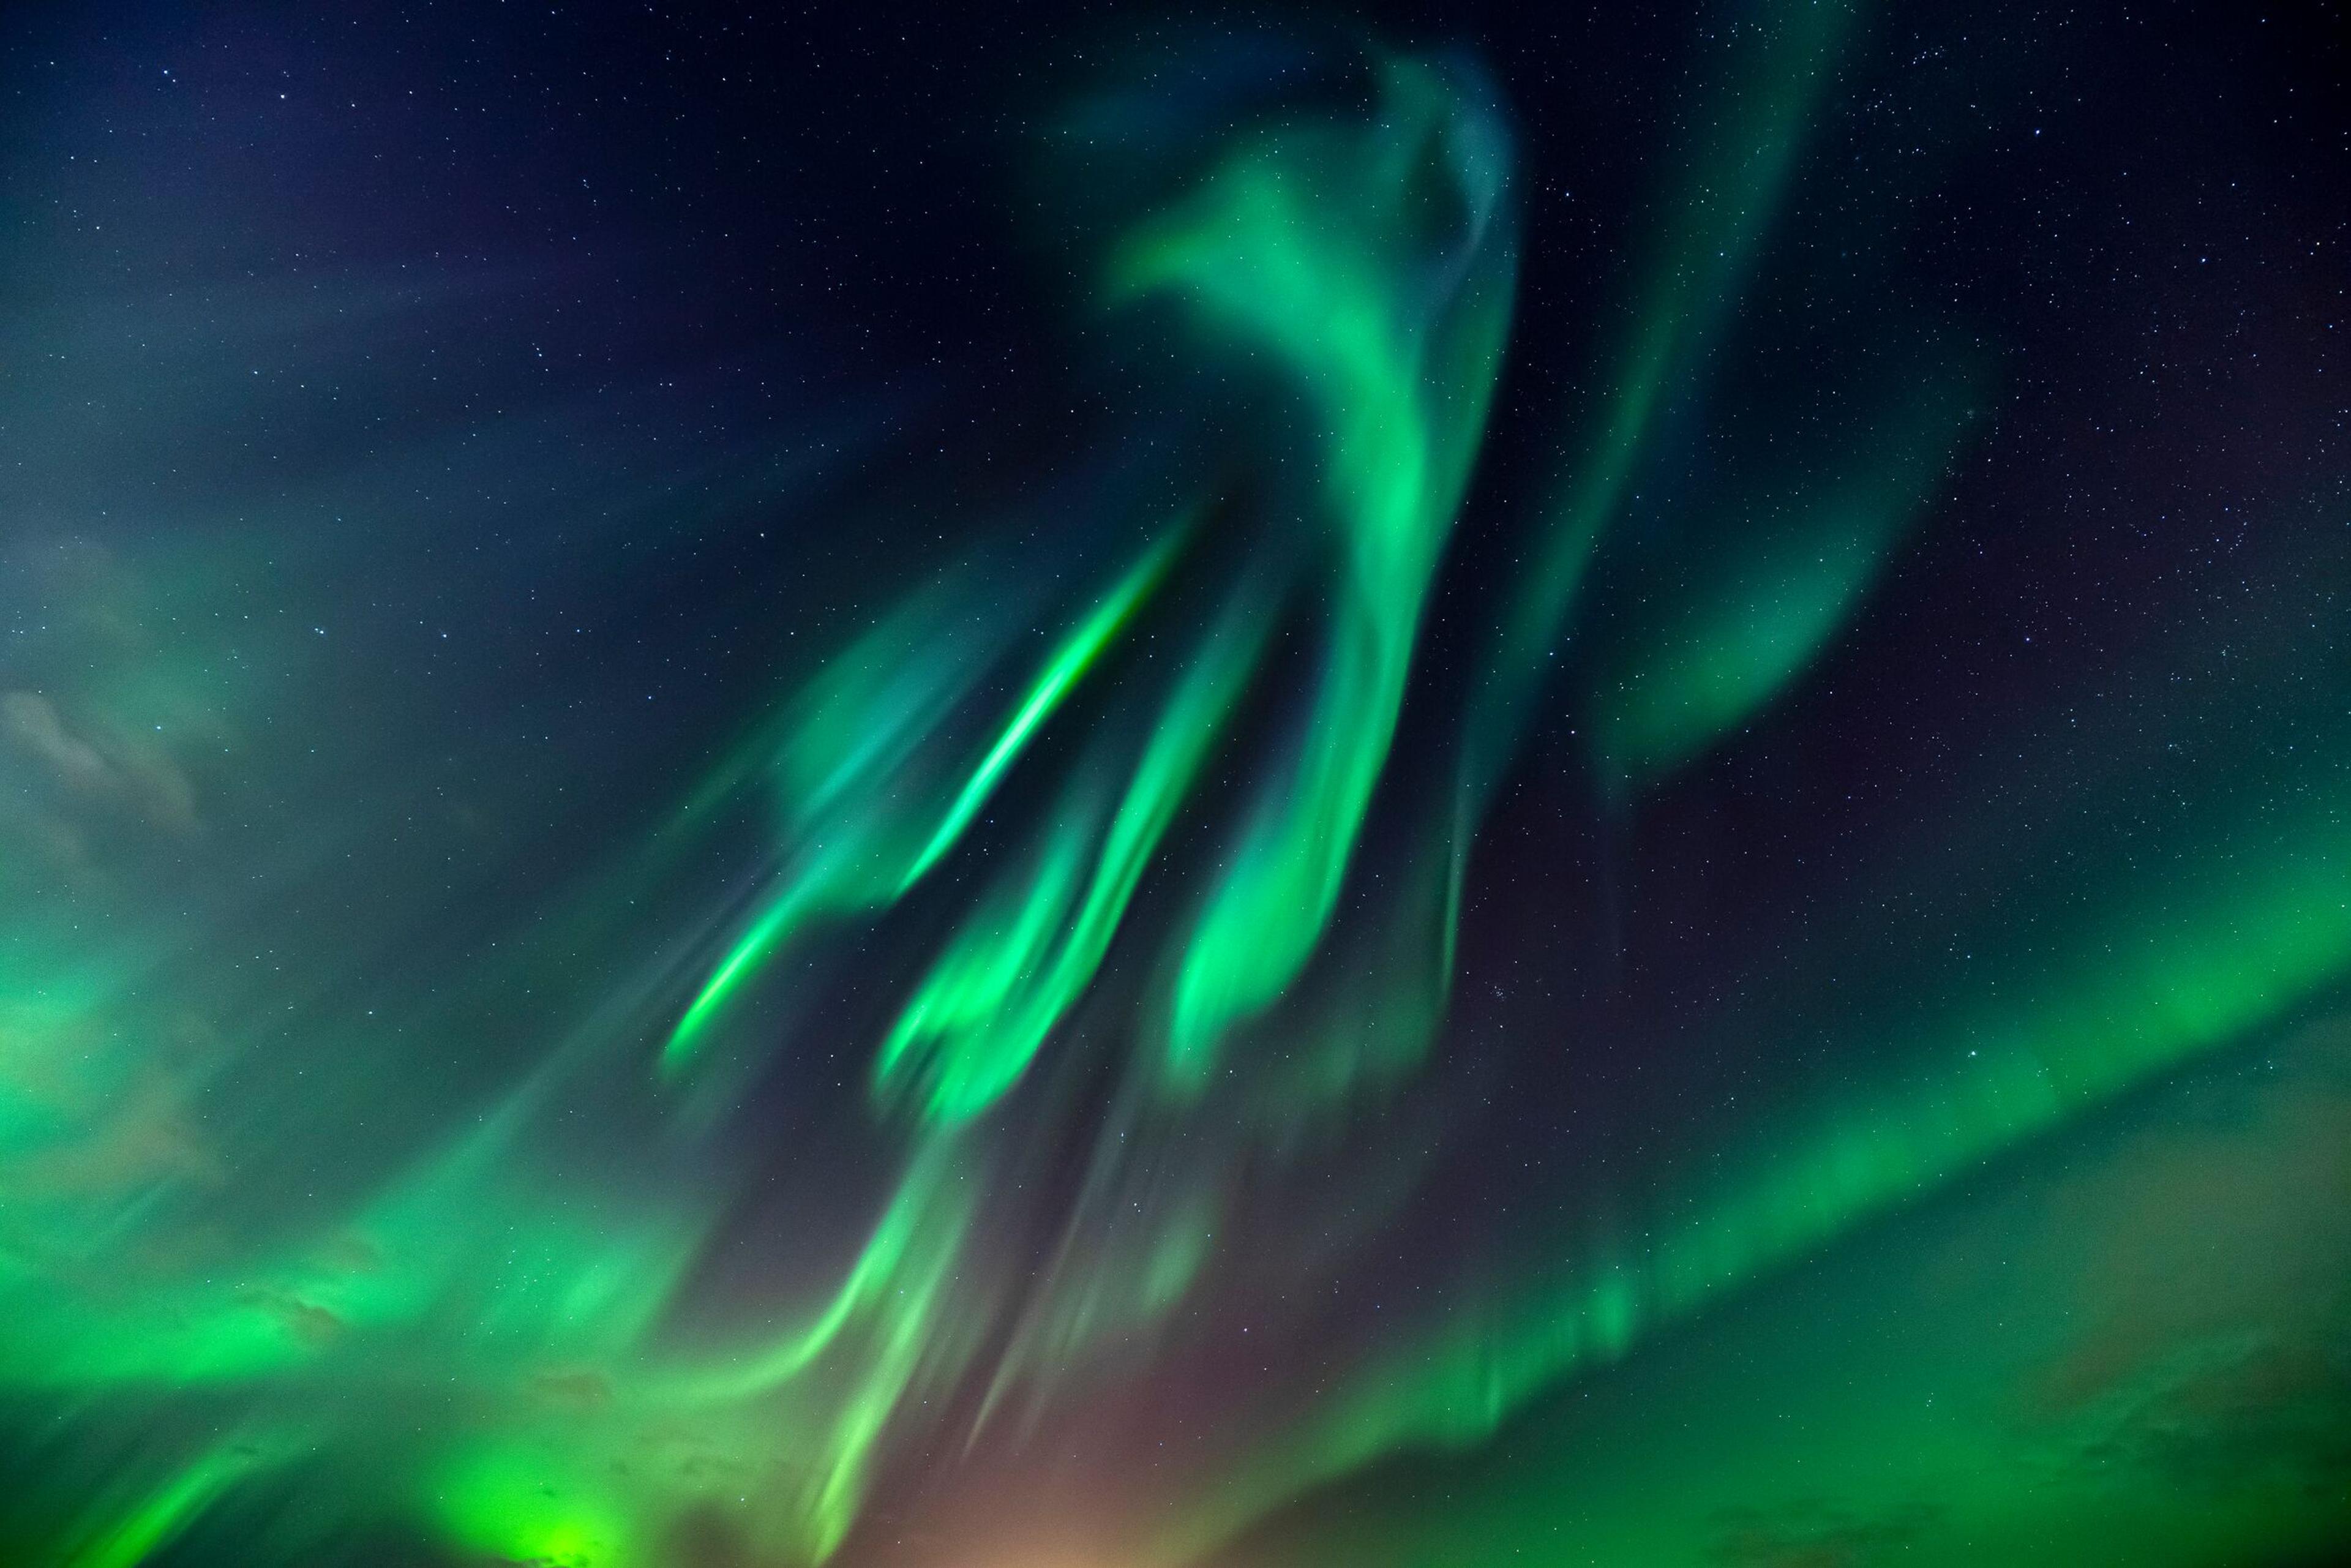 Ethereal green auroras sweeping across the night sky, with dynamic shapes and swirls, evoking the fluid motion of a celestial dance.